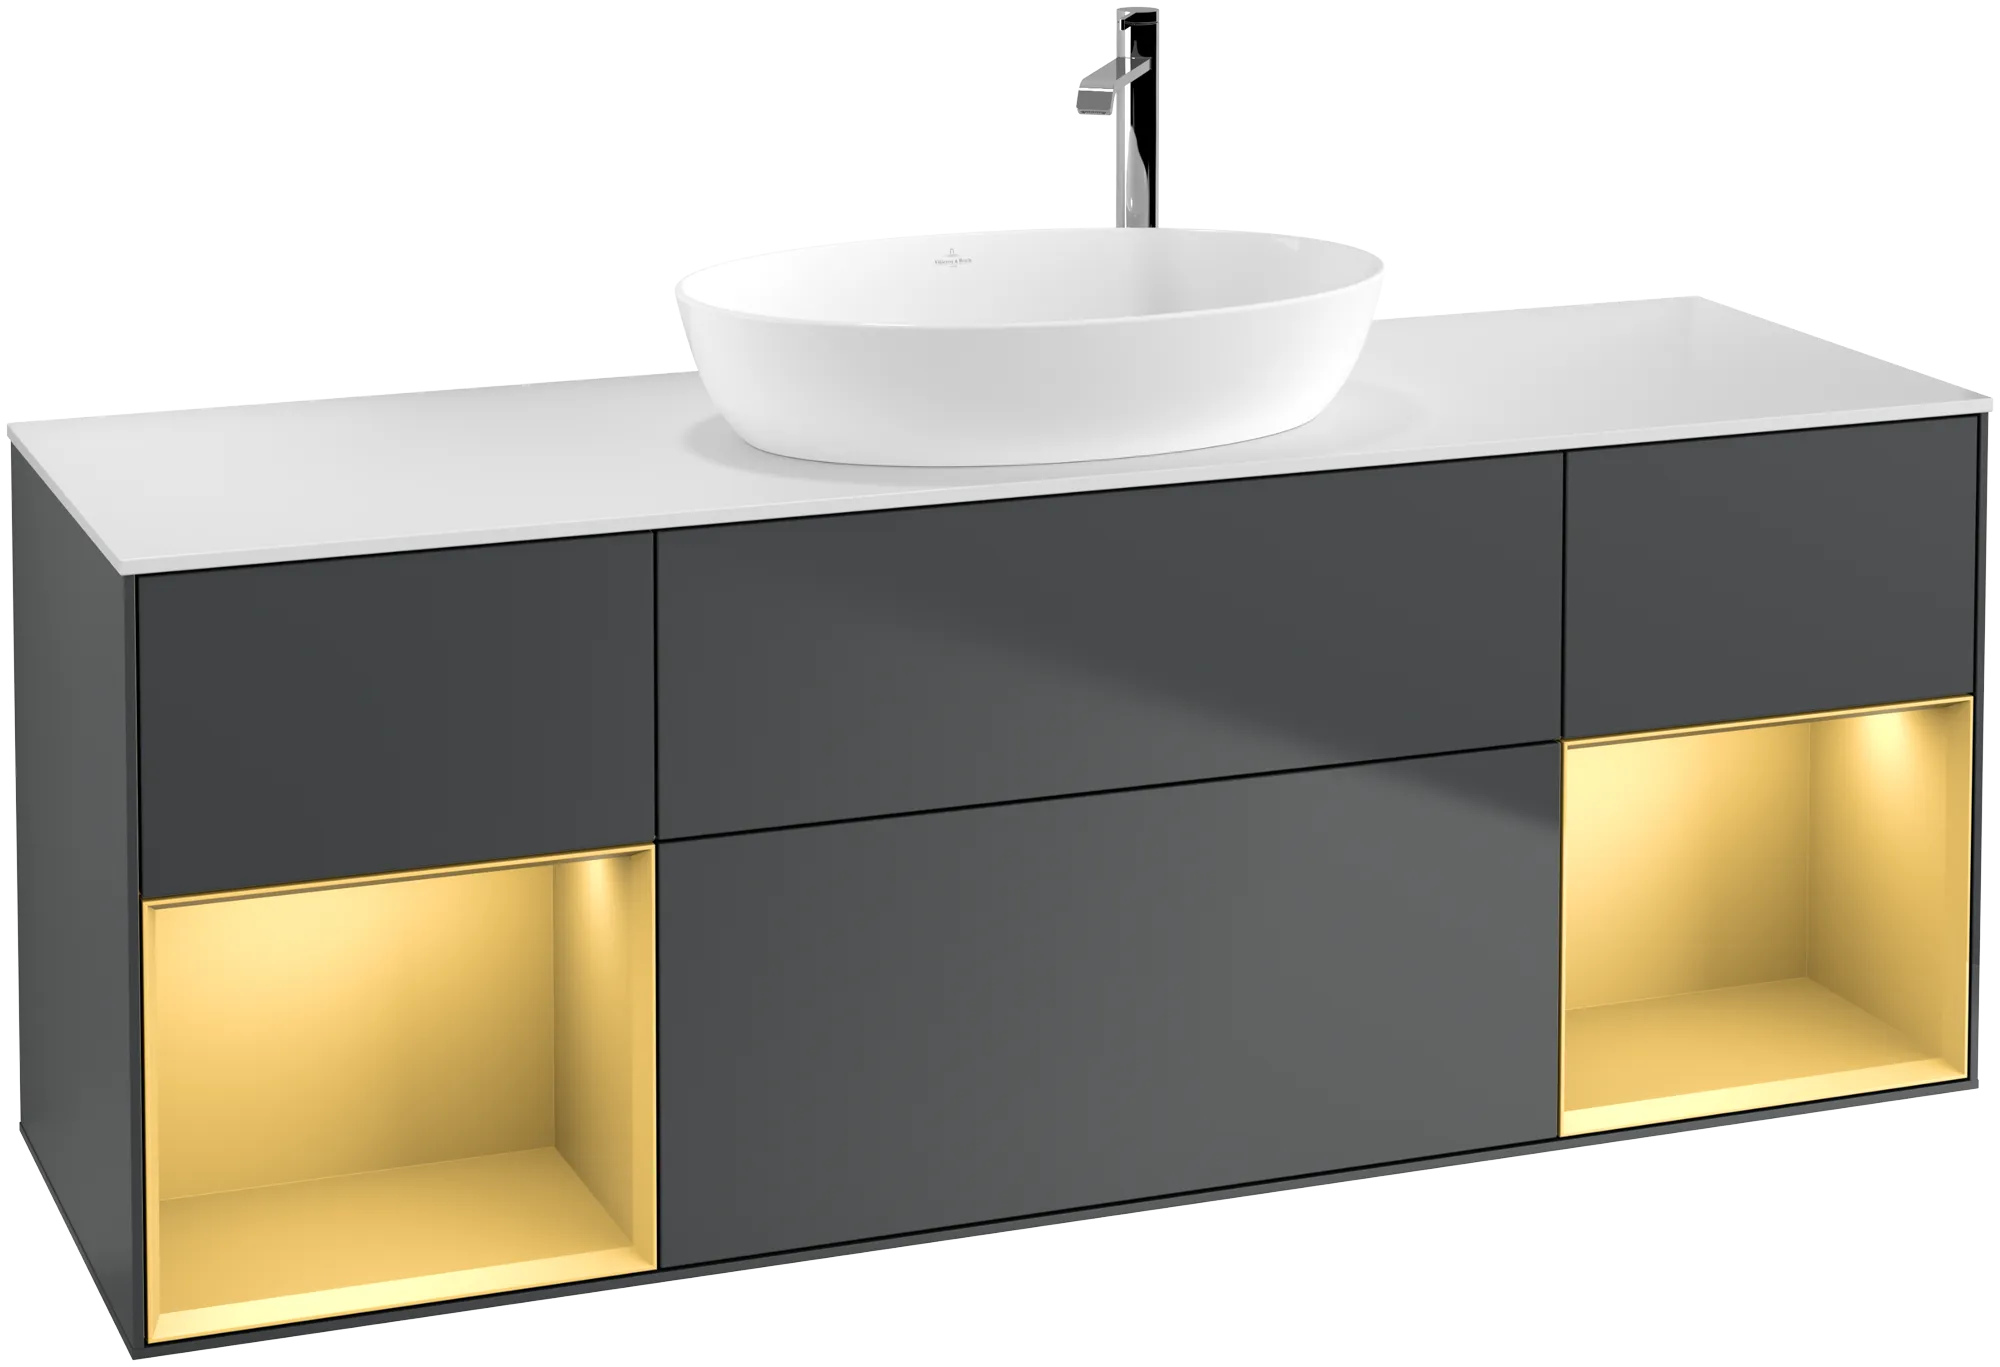 Picture of VILLEROY BOCH Finion Vanity unit, with lighting, 4 pull-out compartments, 1600 x 603 x 501 mm, Midnight Blue Matt Lacquer / Gold Matt Lacquer / Glass White Matt #G981HFHG